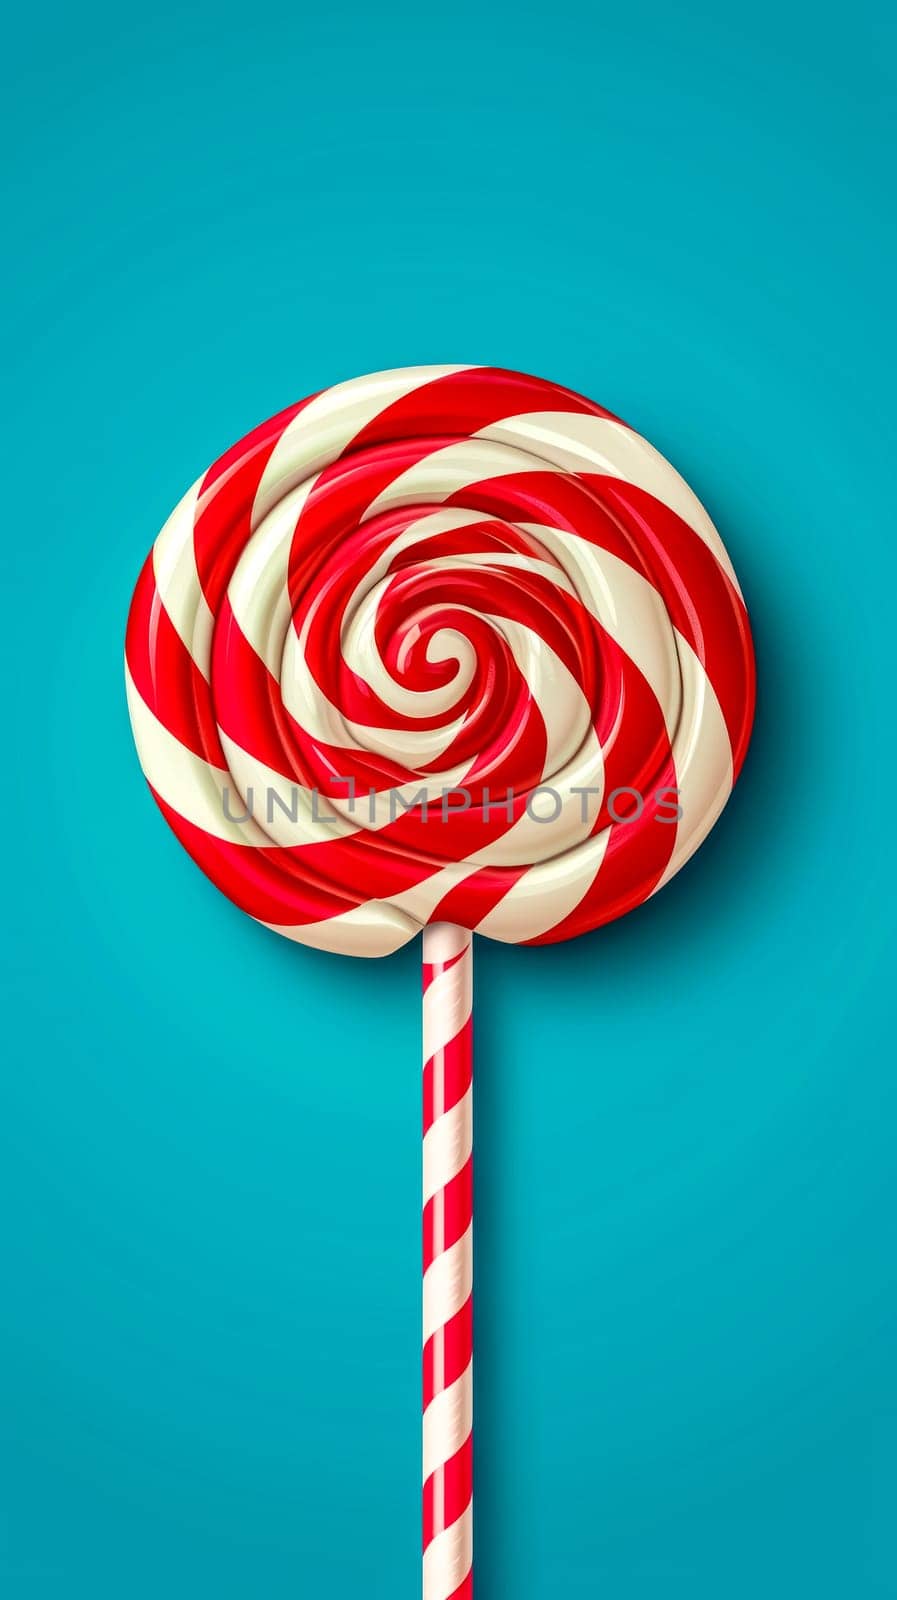 A vibrant red and white striped lollipop stands out against a bright turquoise background, creating a playful and appealing visual with a clear space for text or additional graphics by Edophoto